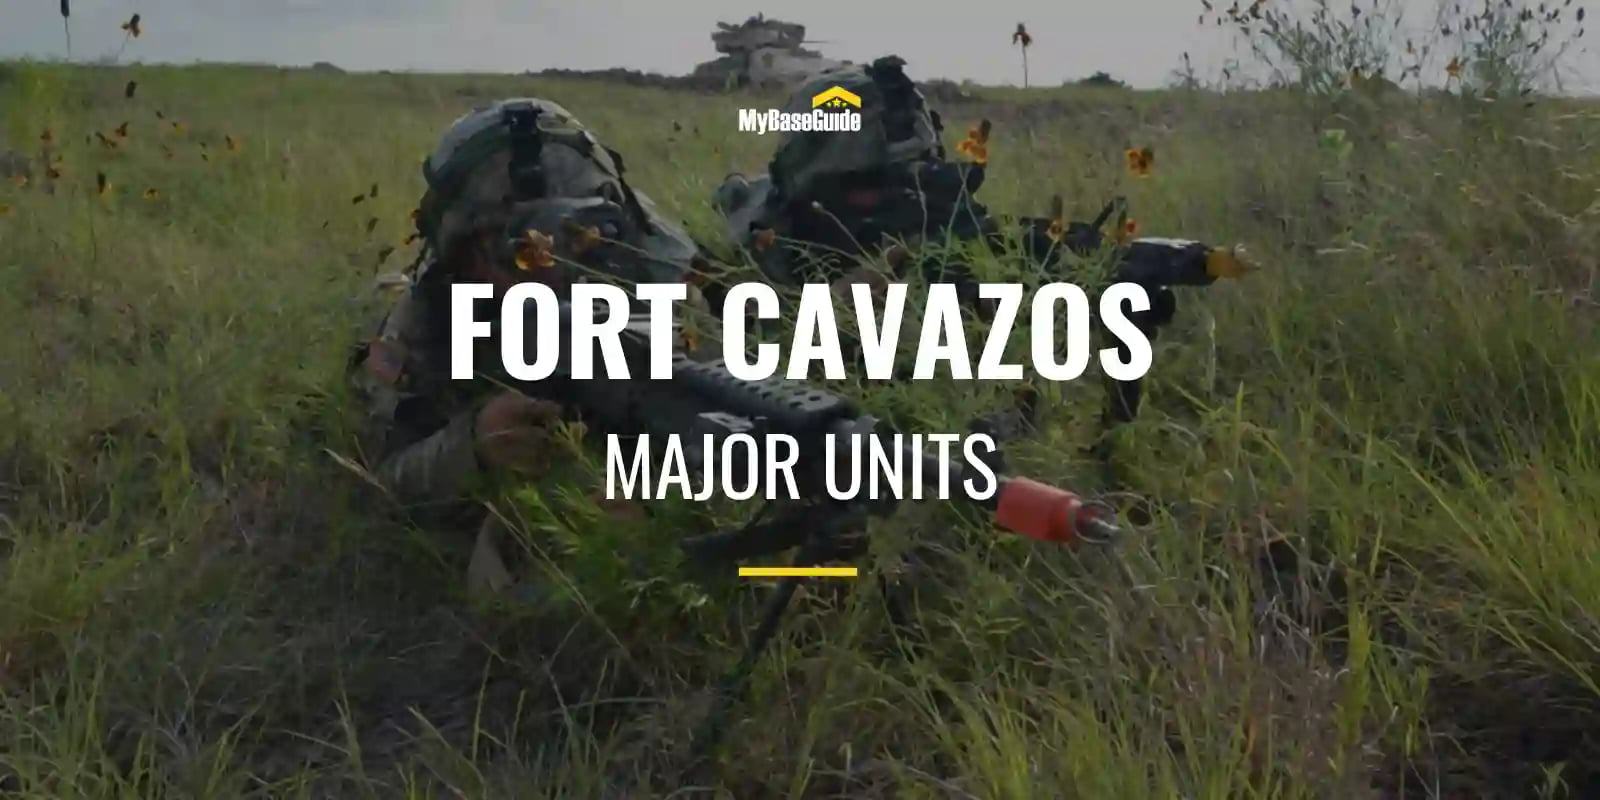 Major Units Stationed At Fort Cavazos